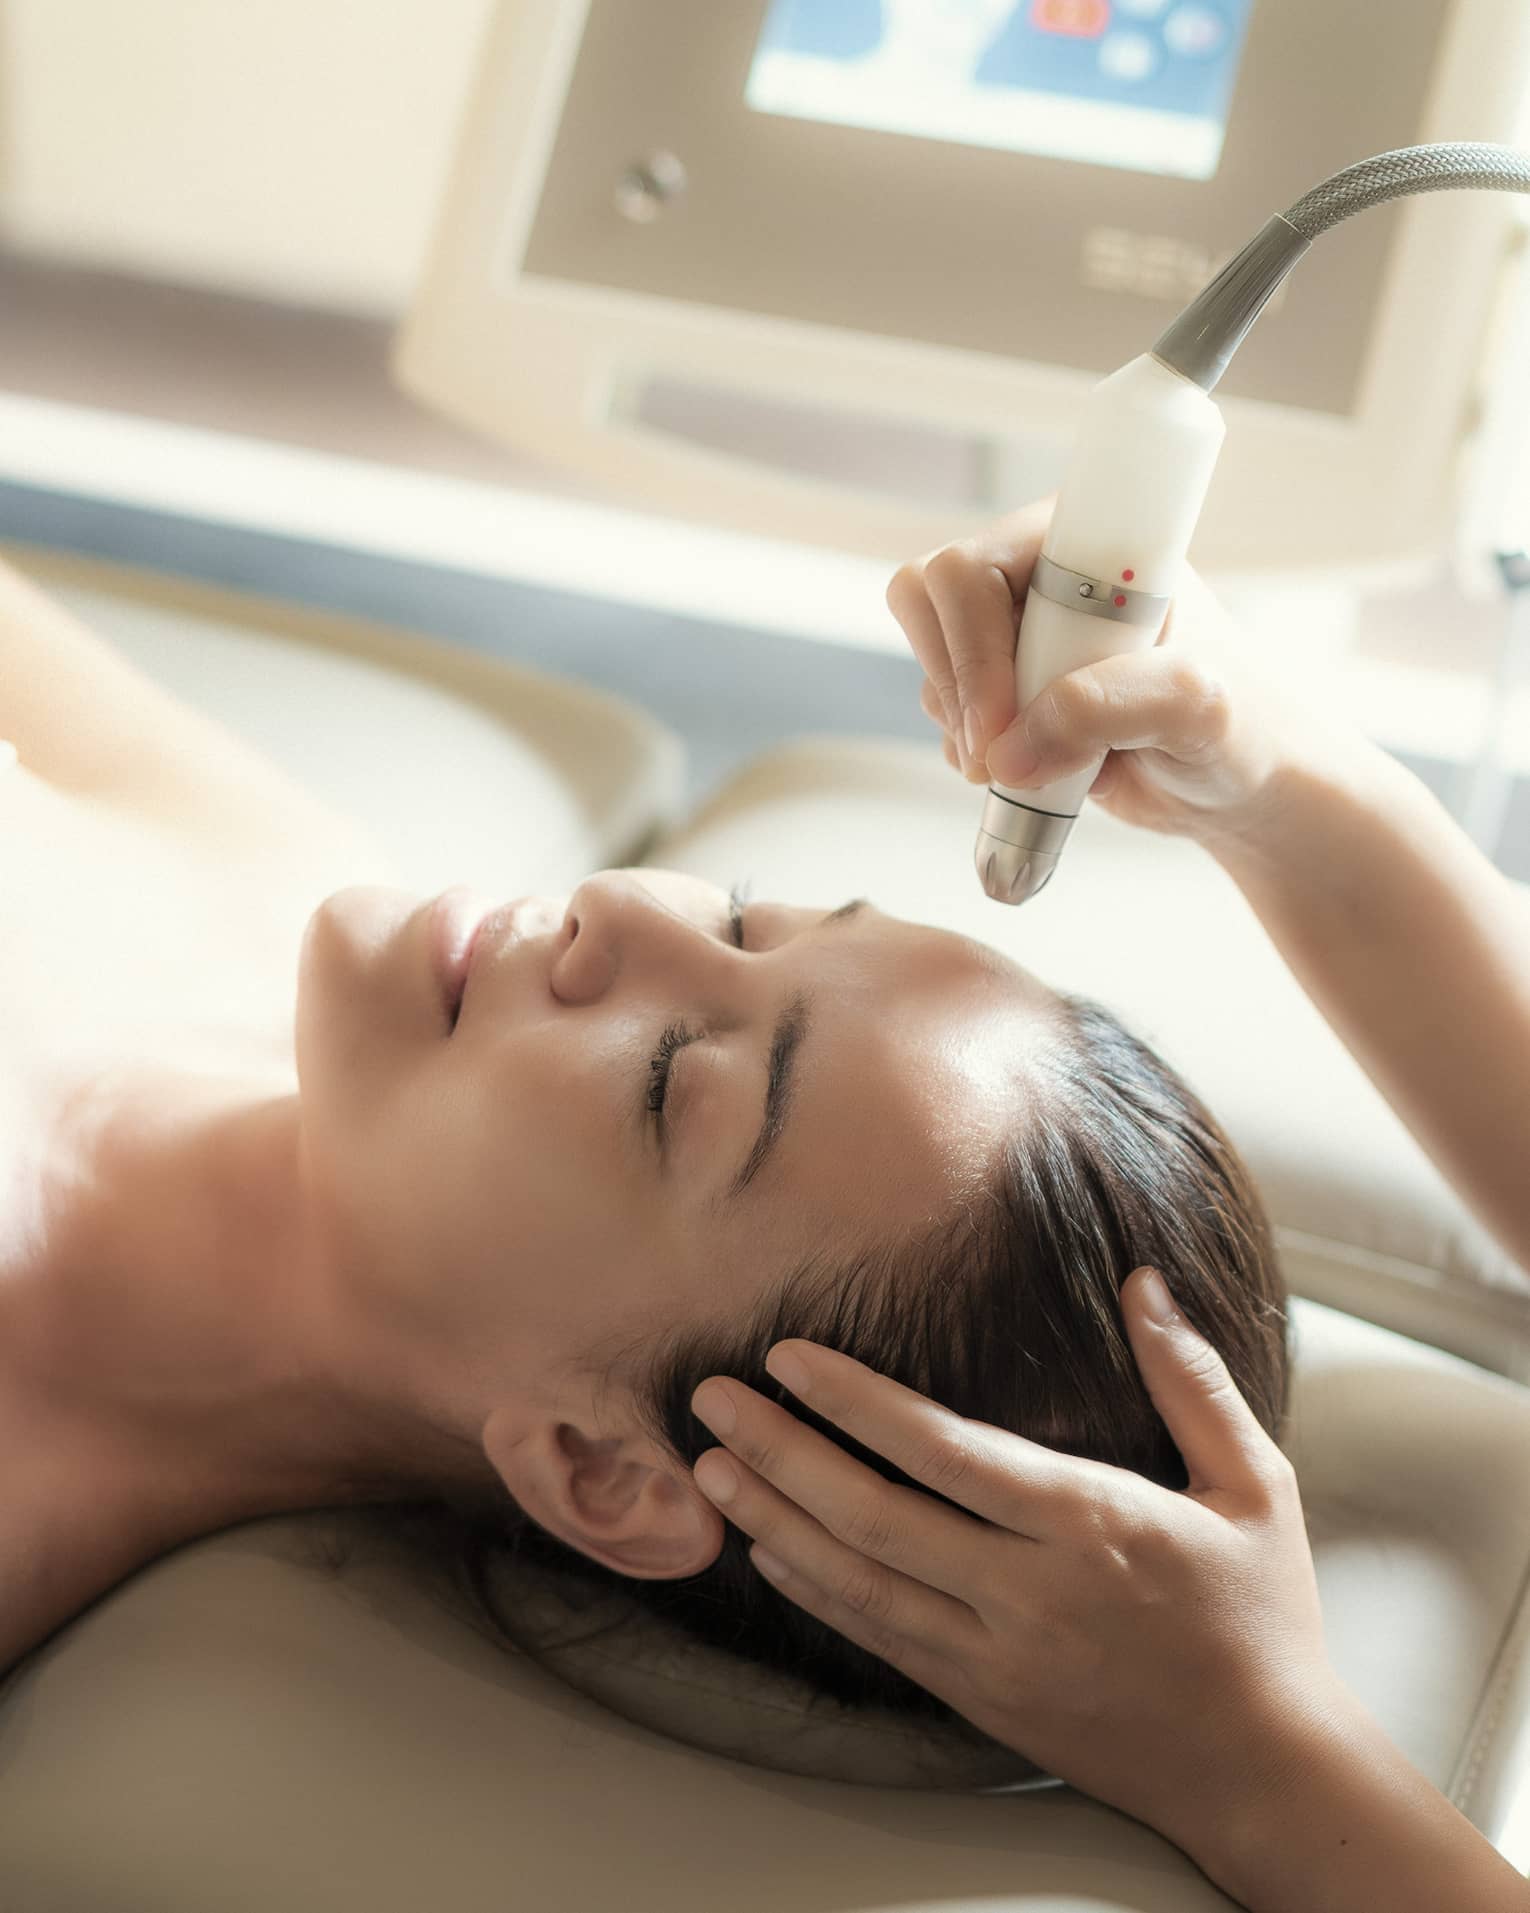 An aesthetician uses a tool on the face of a relaxing woman.